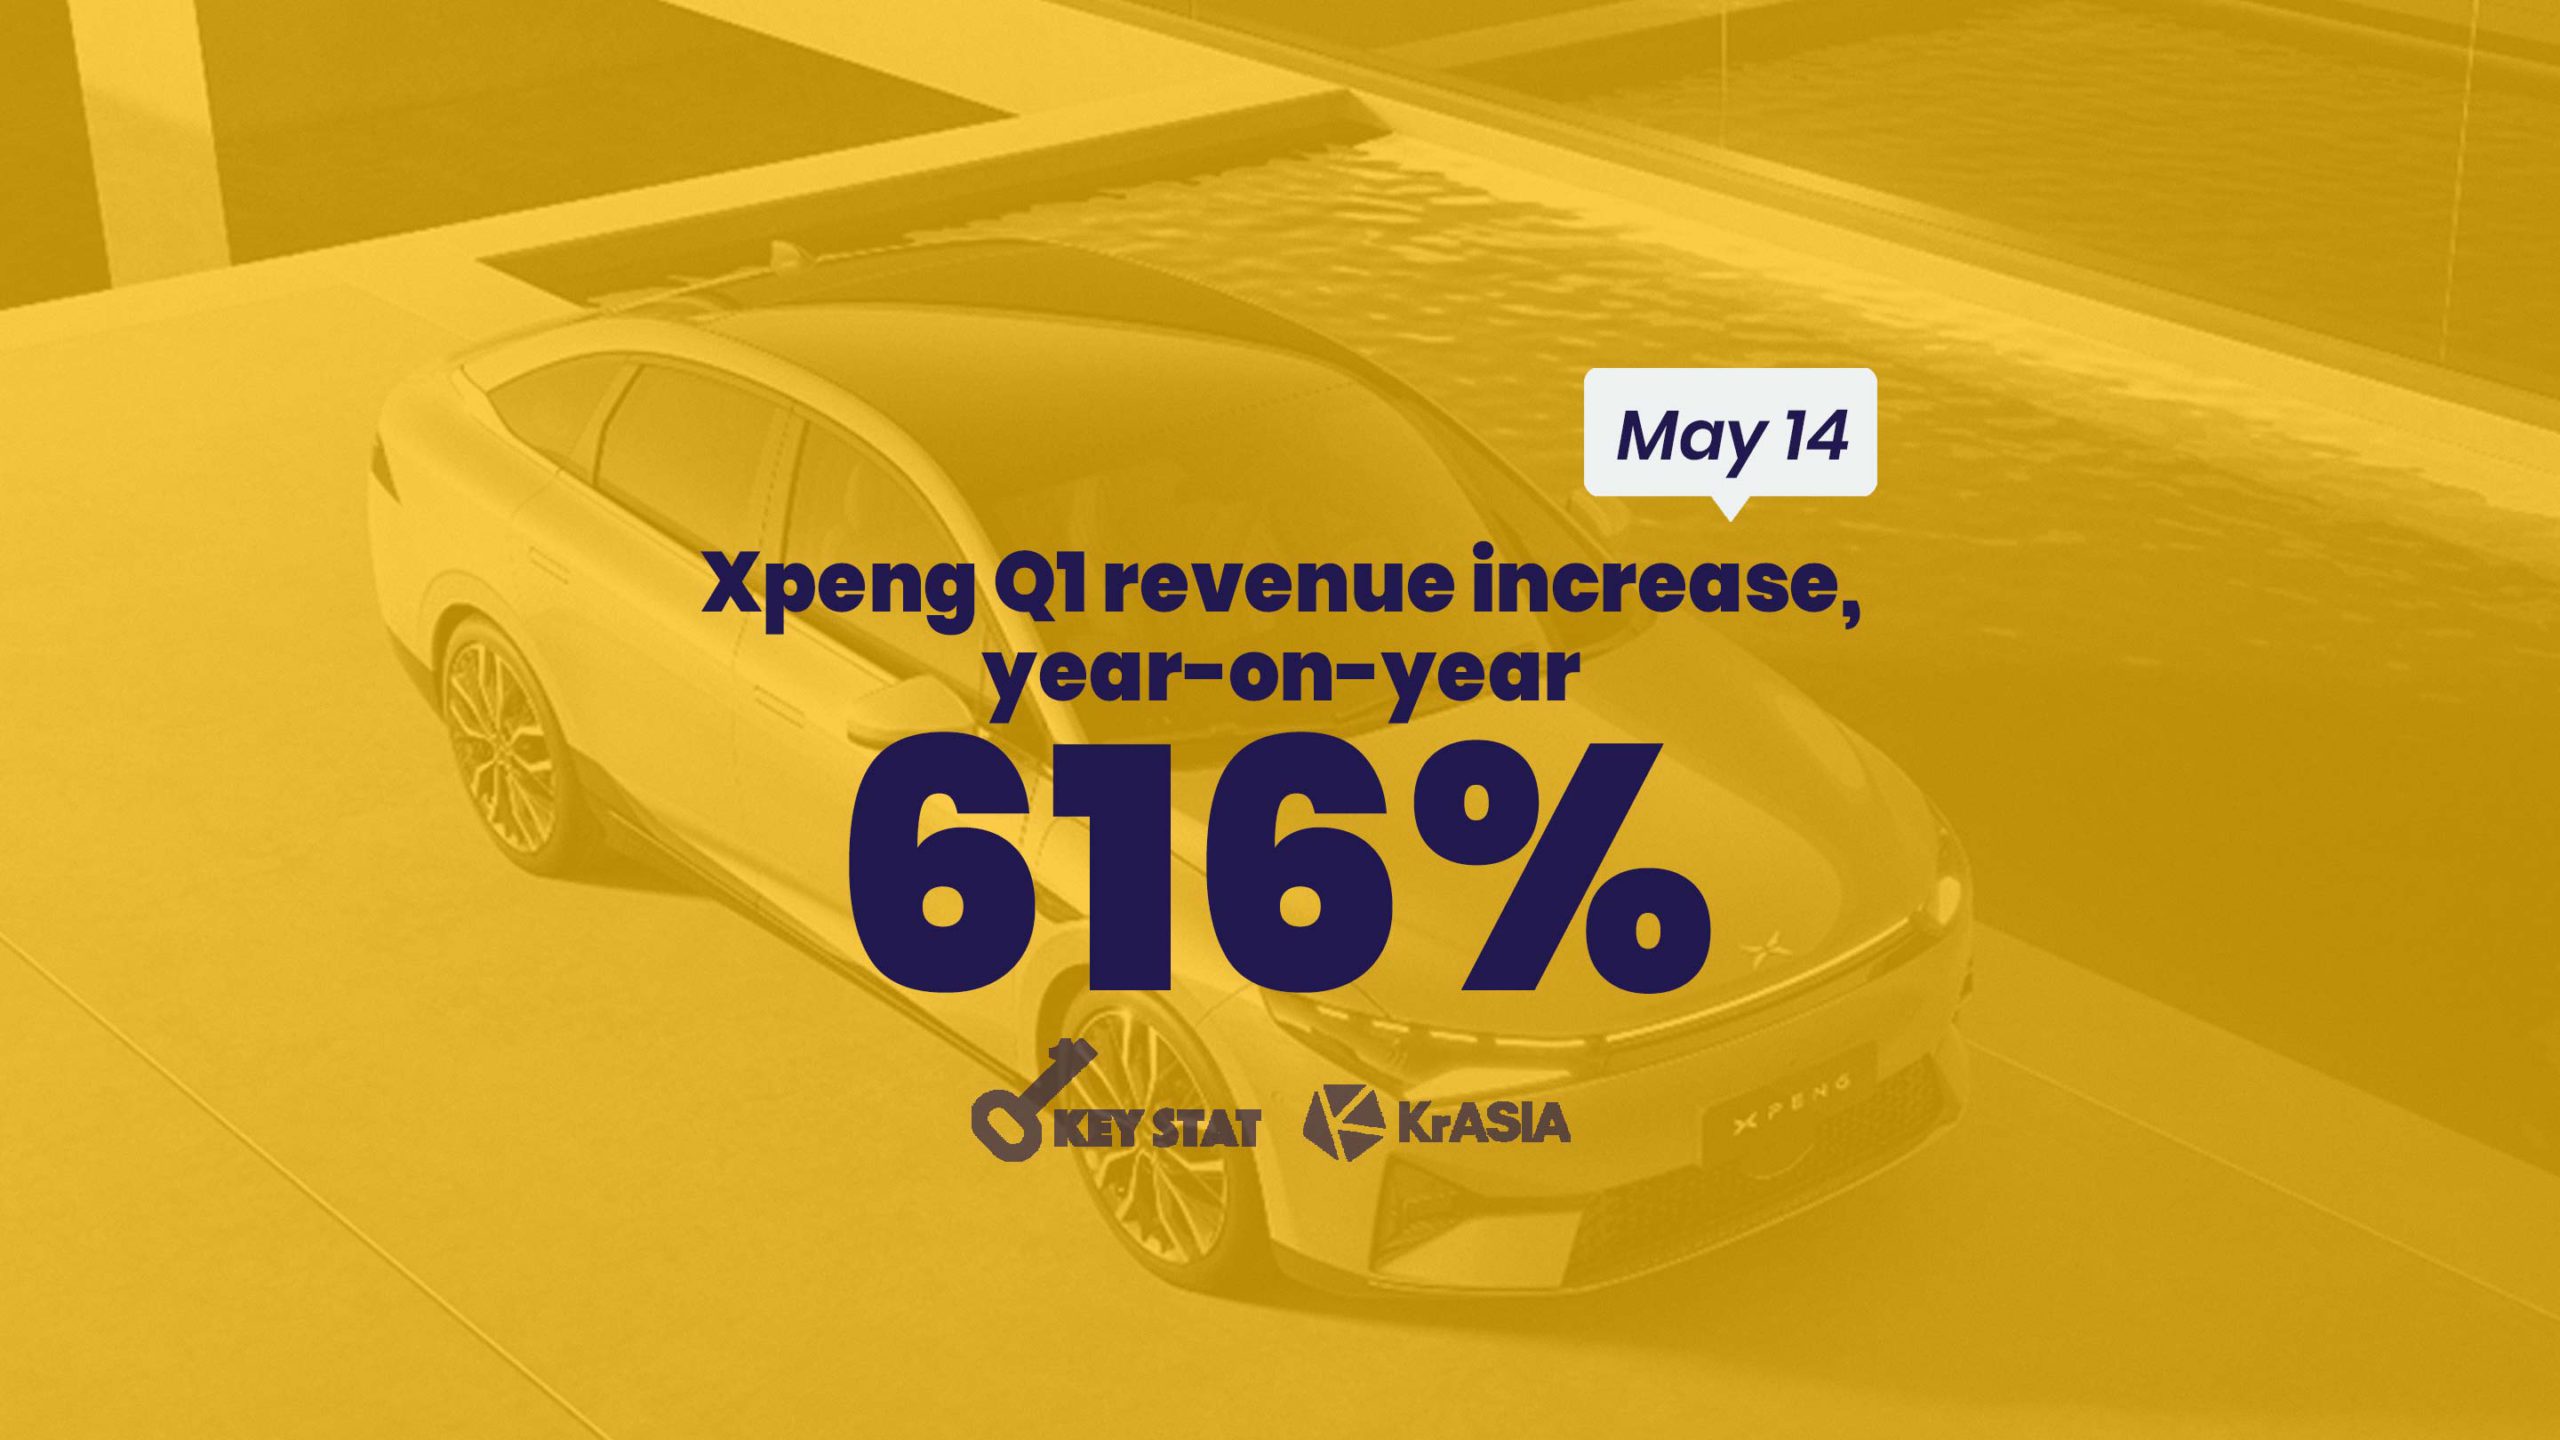 KEY STAT | Xpeng posts robust revenue growth as autonomous driving software propels company forward